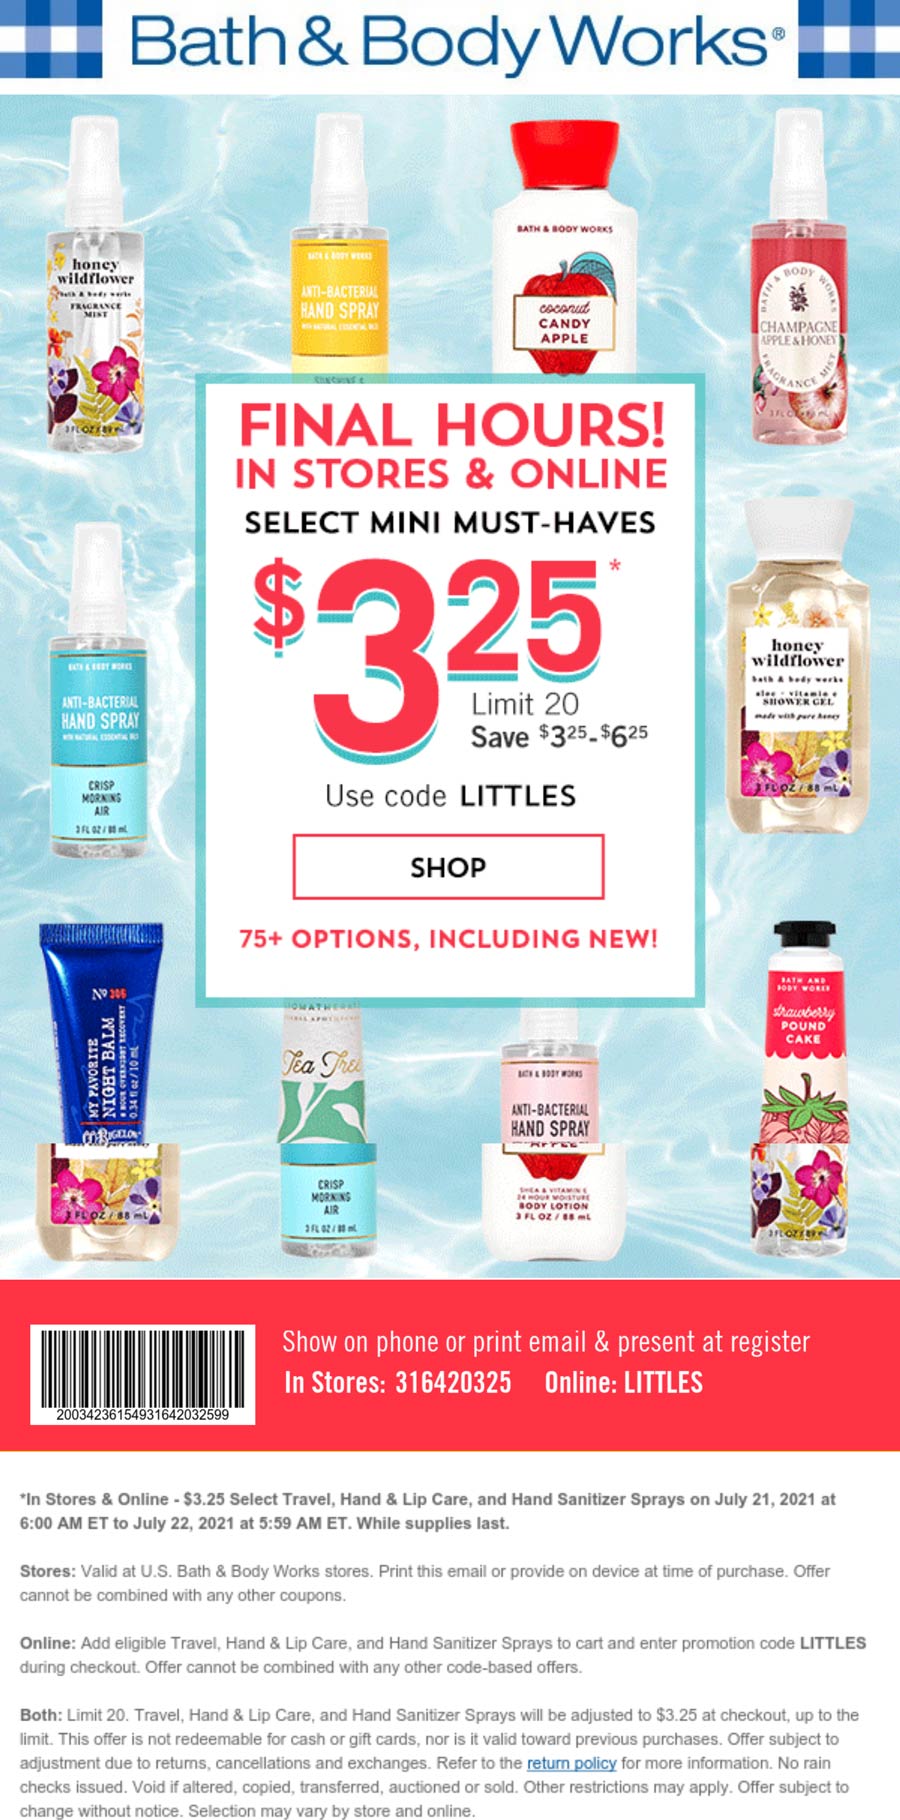 Bath & Body Works stores Coupon  $3.25 minis today at Bath & Body Works, or online via promo code LITTLES #bathbodyworks 